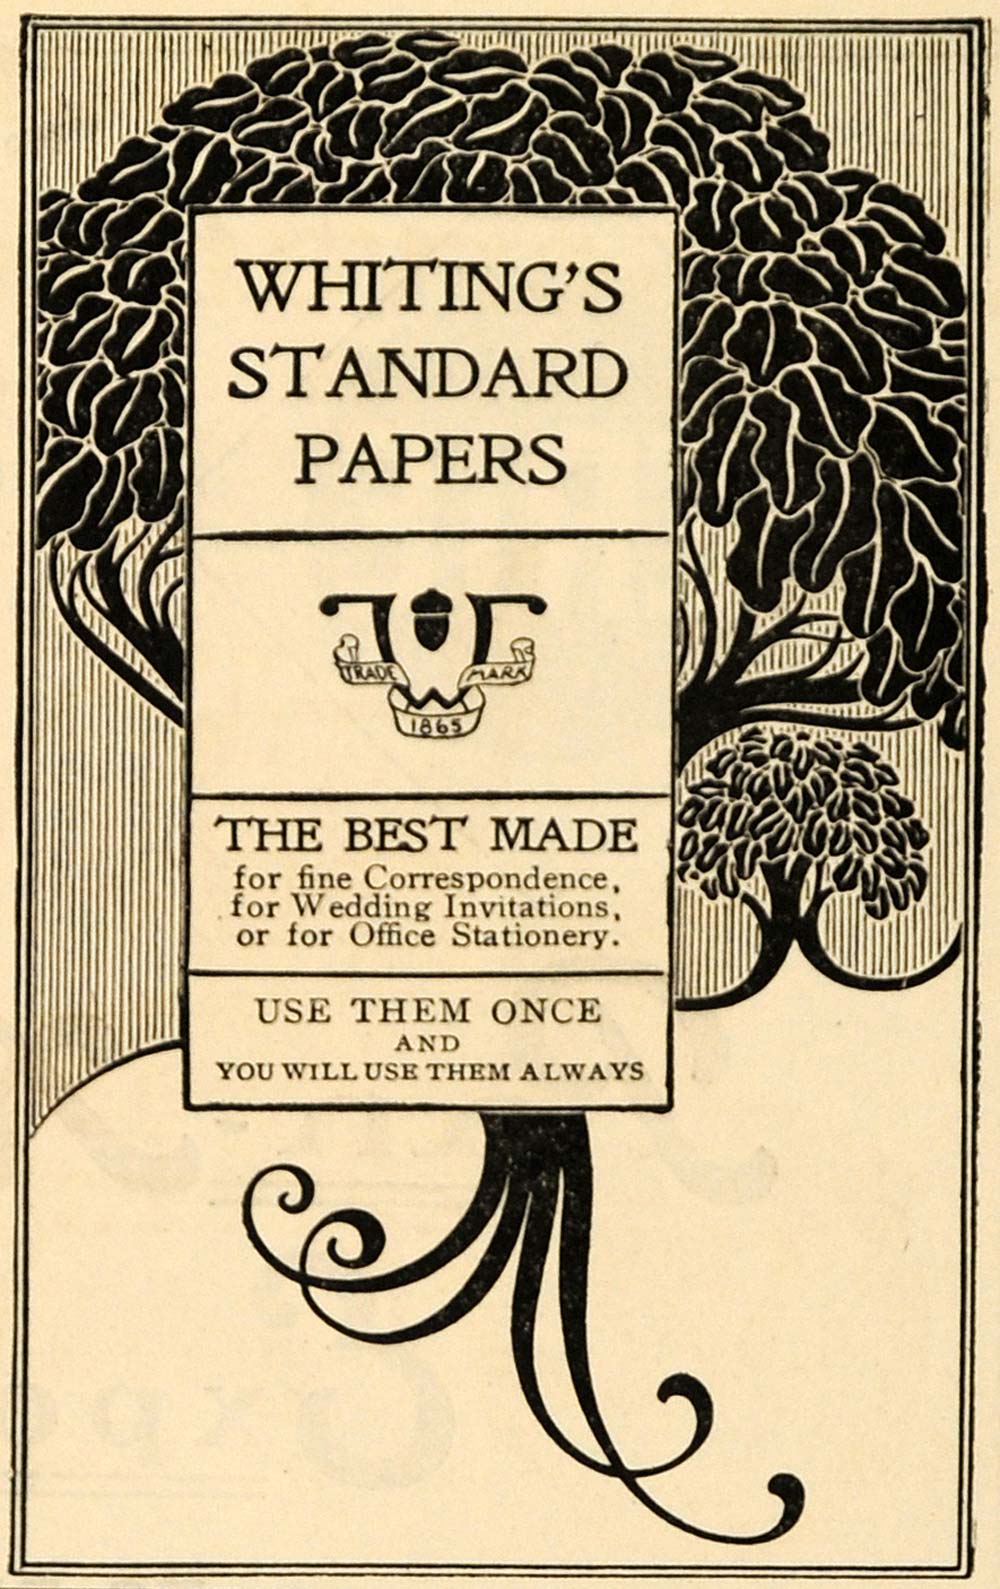 1900 Ad Whiting's Standard Papers for Correspondence - ORIGINAL ADVERTISING TIN1